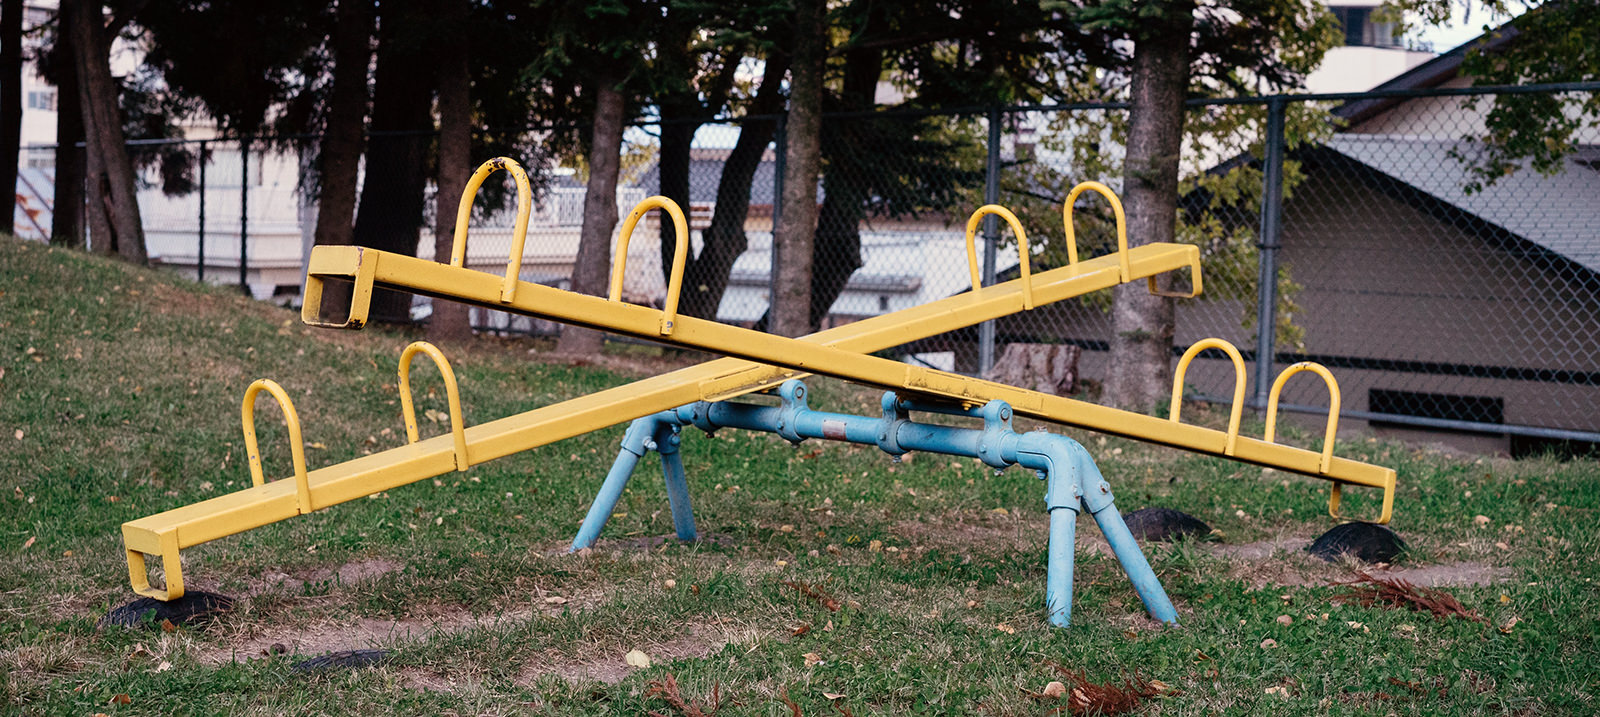 An image of a teeter-totter